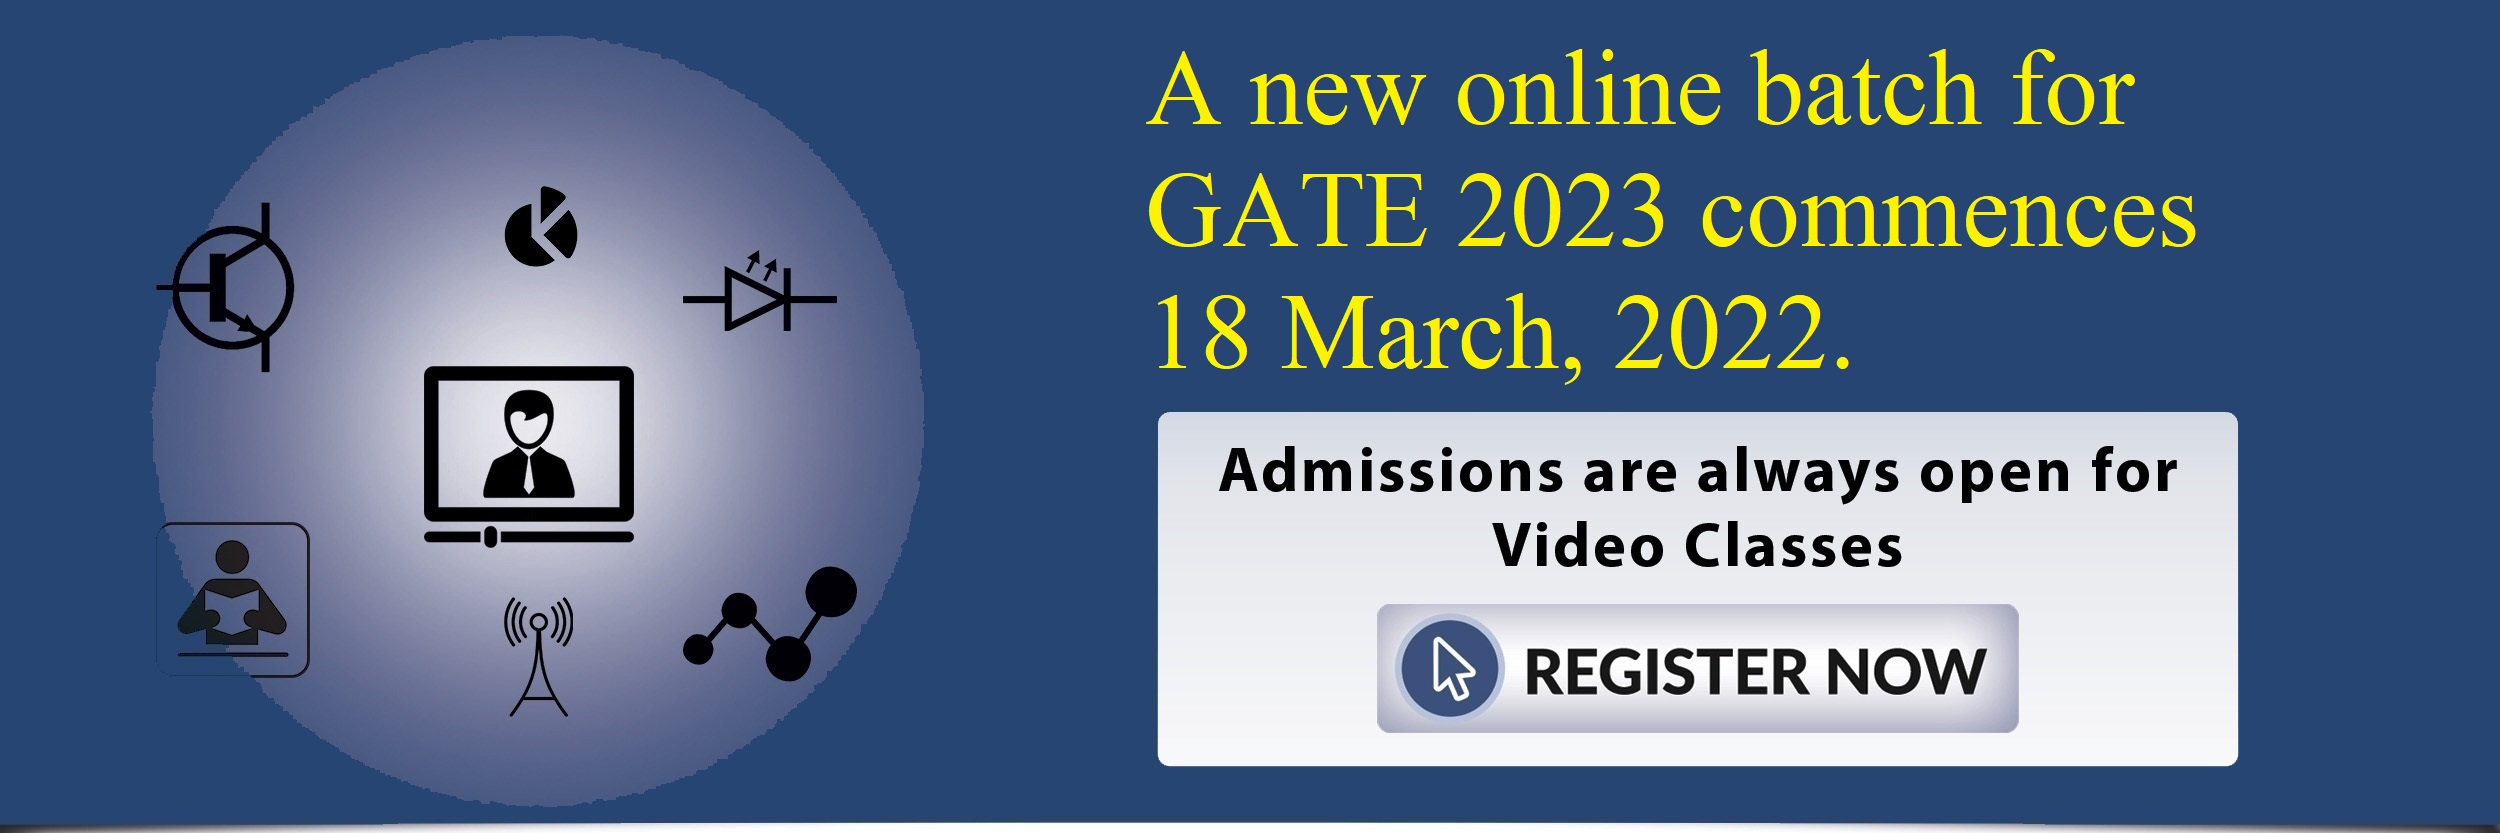 Admissions open for Online GATE-2023